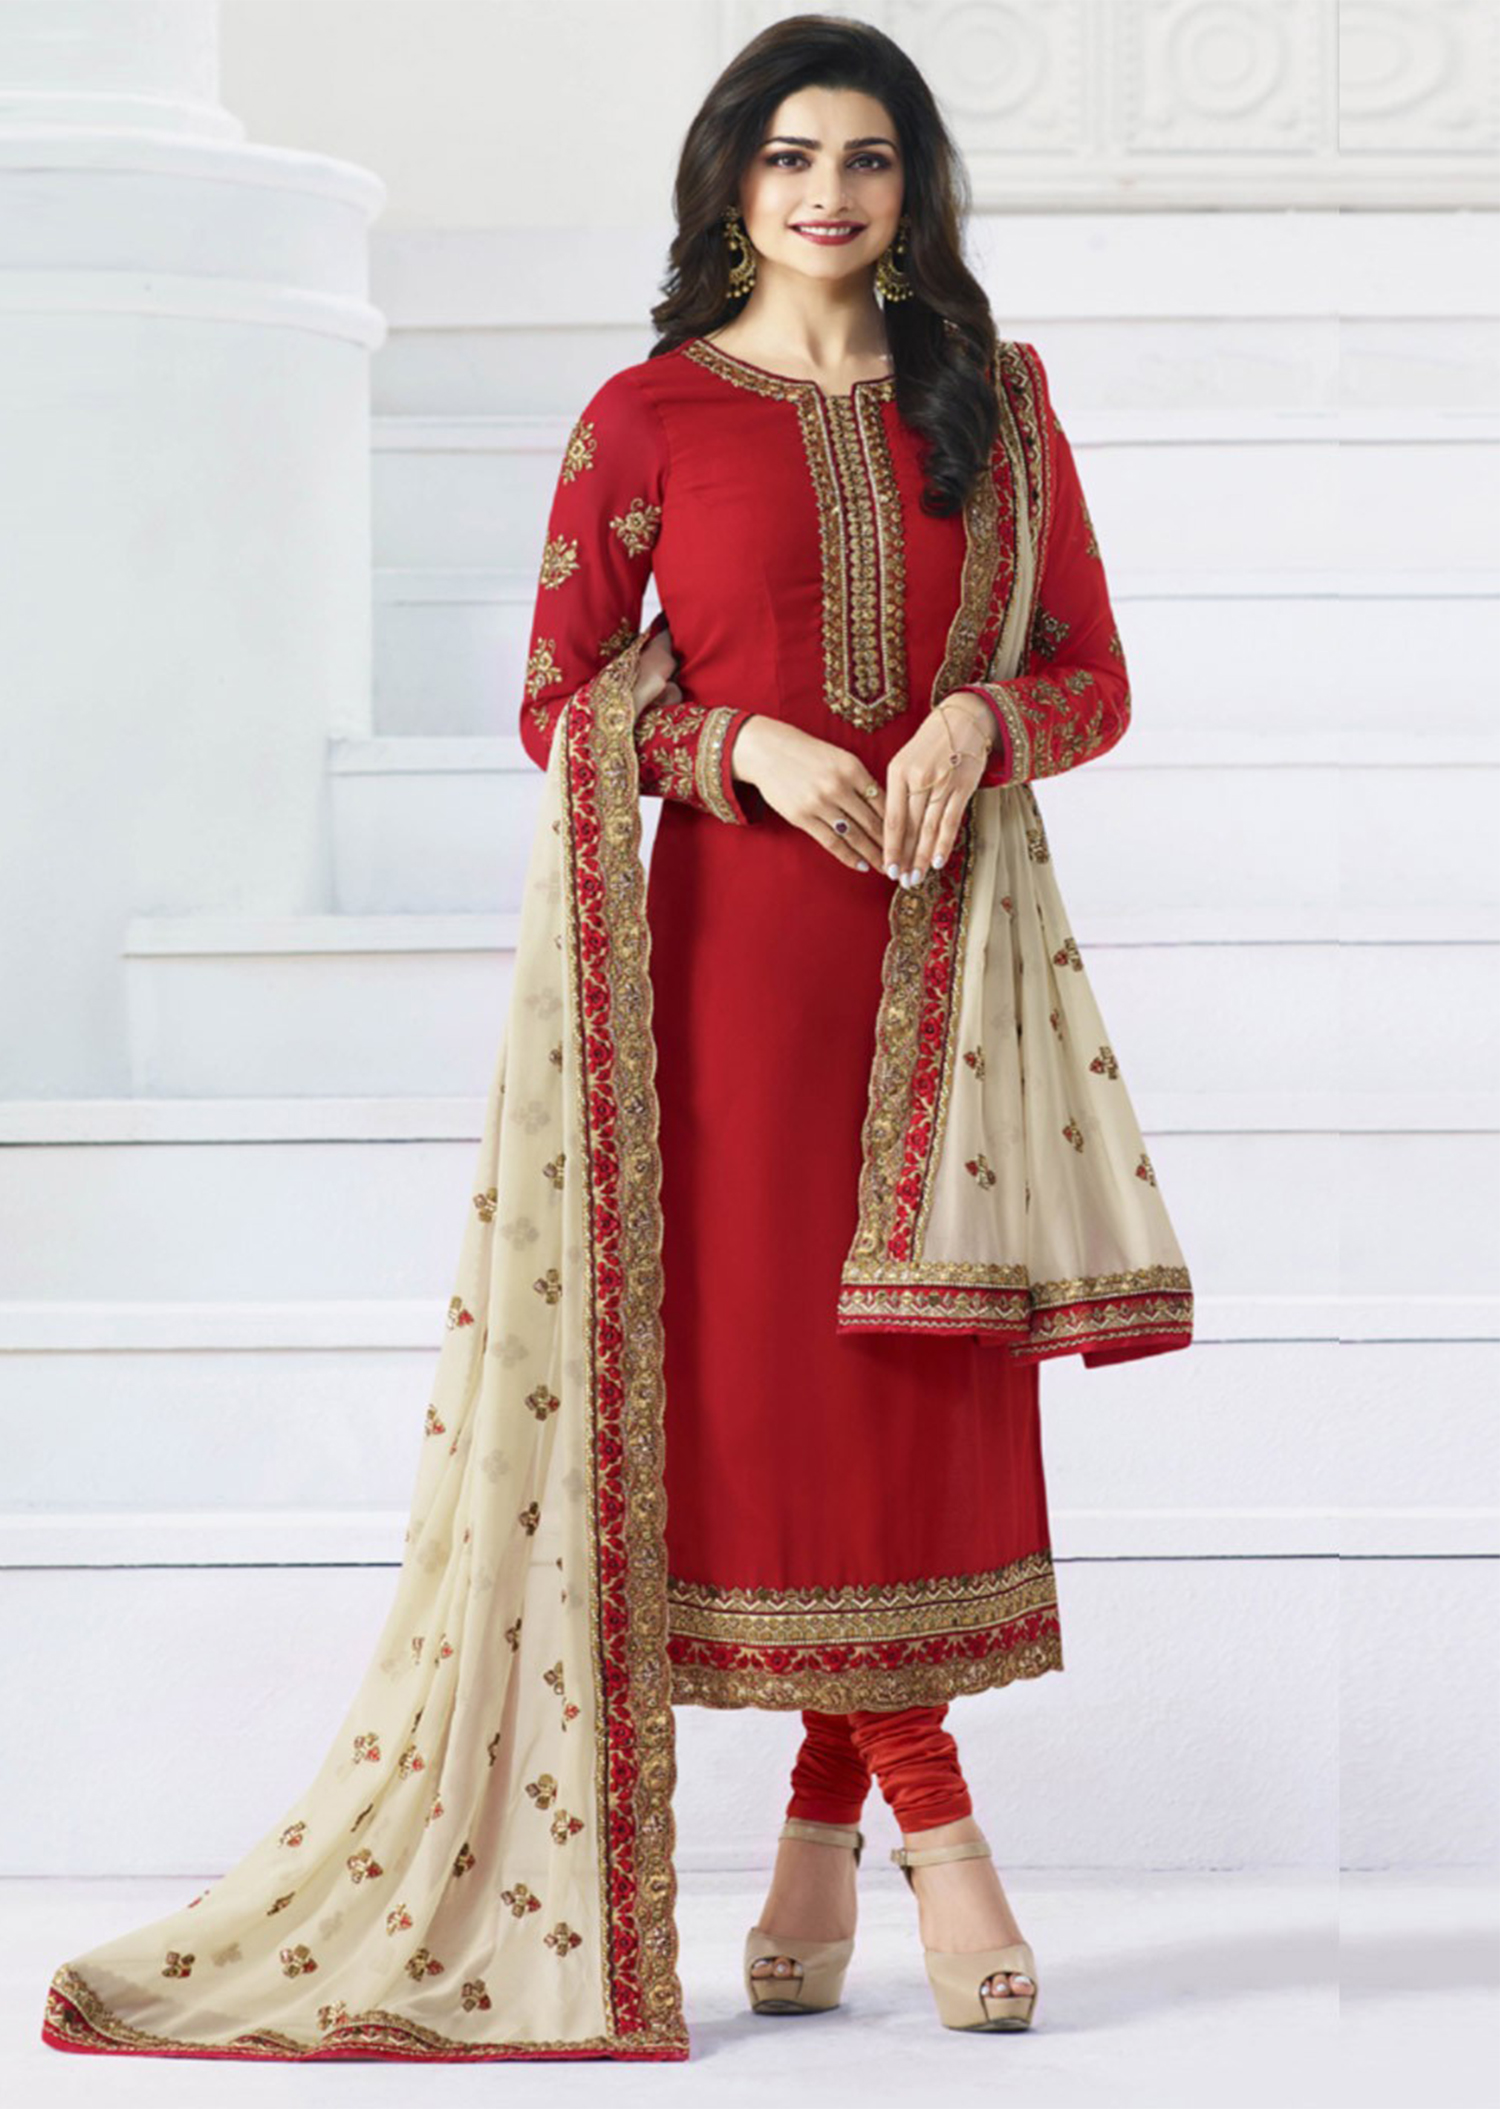 Chiffon Red Designer Salwars Suit, Dry Clean, 47% OFF